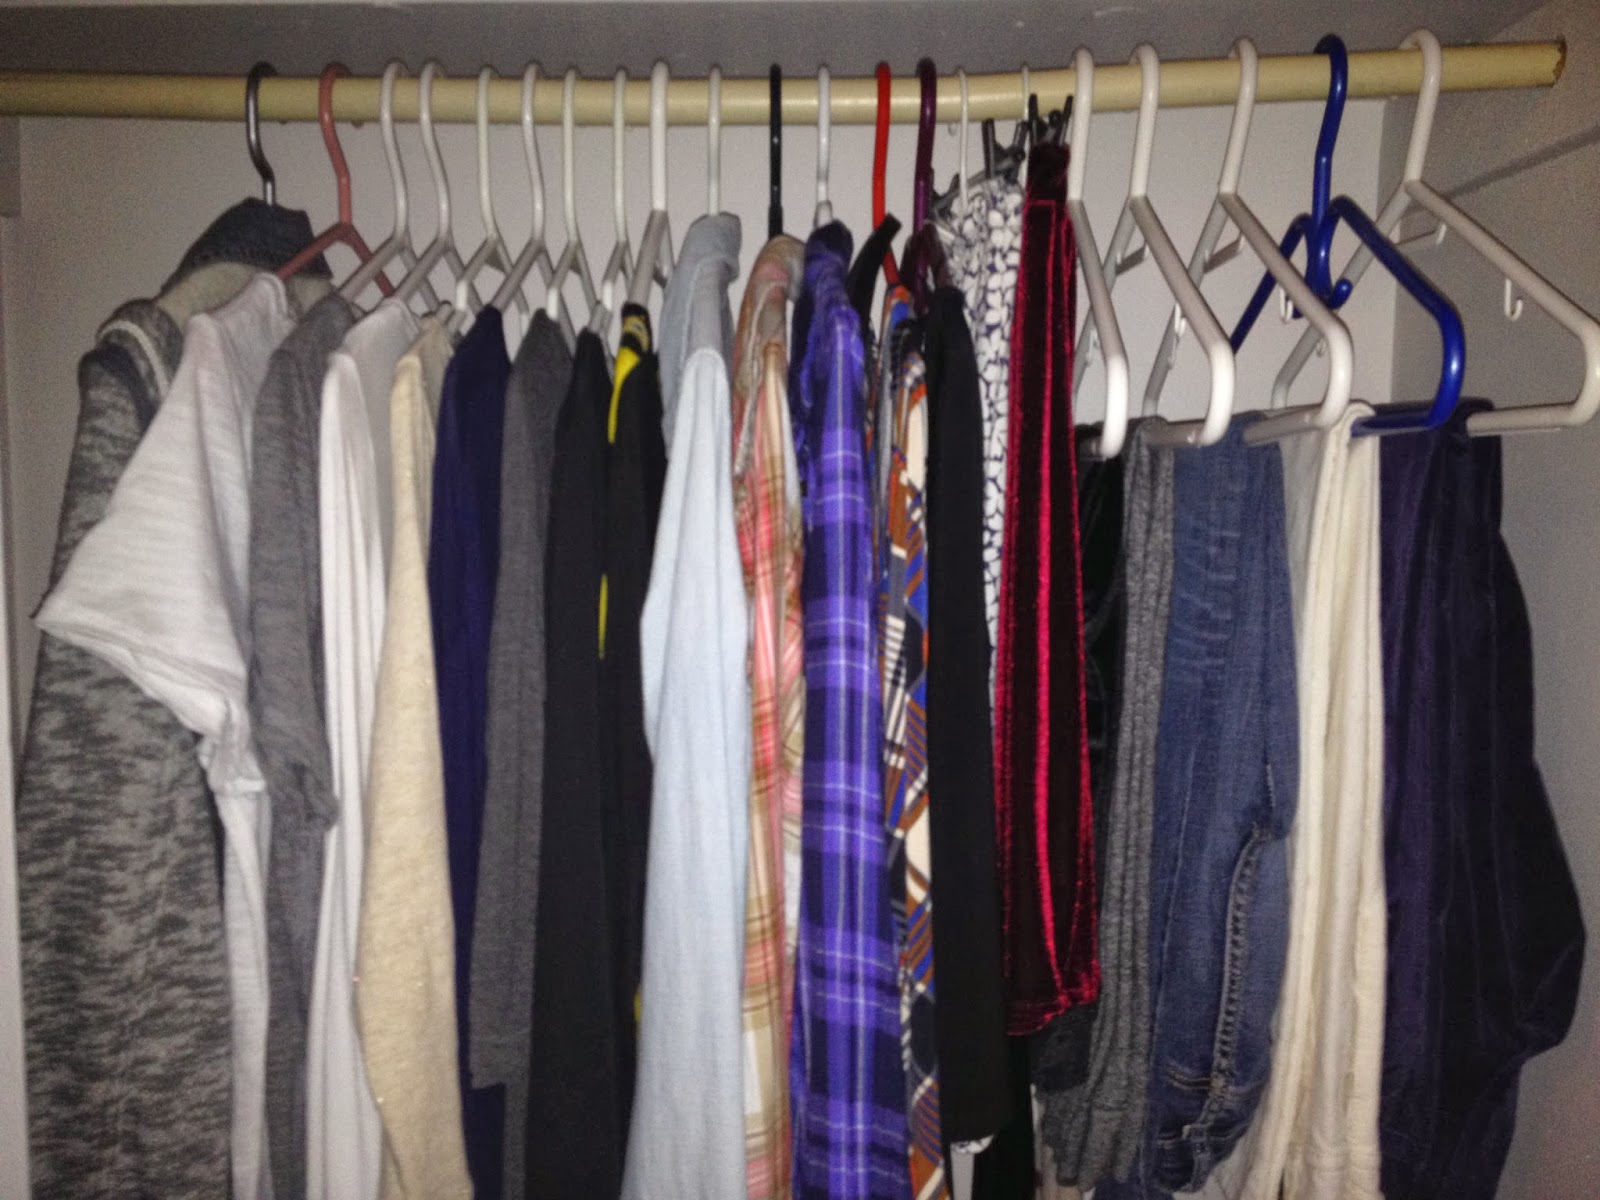 Chloe's life: How did so many clothes find their way in my wardrobe?